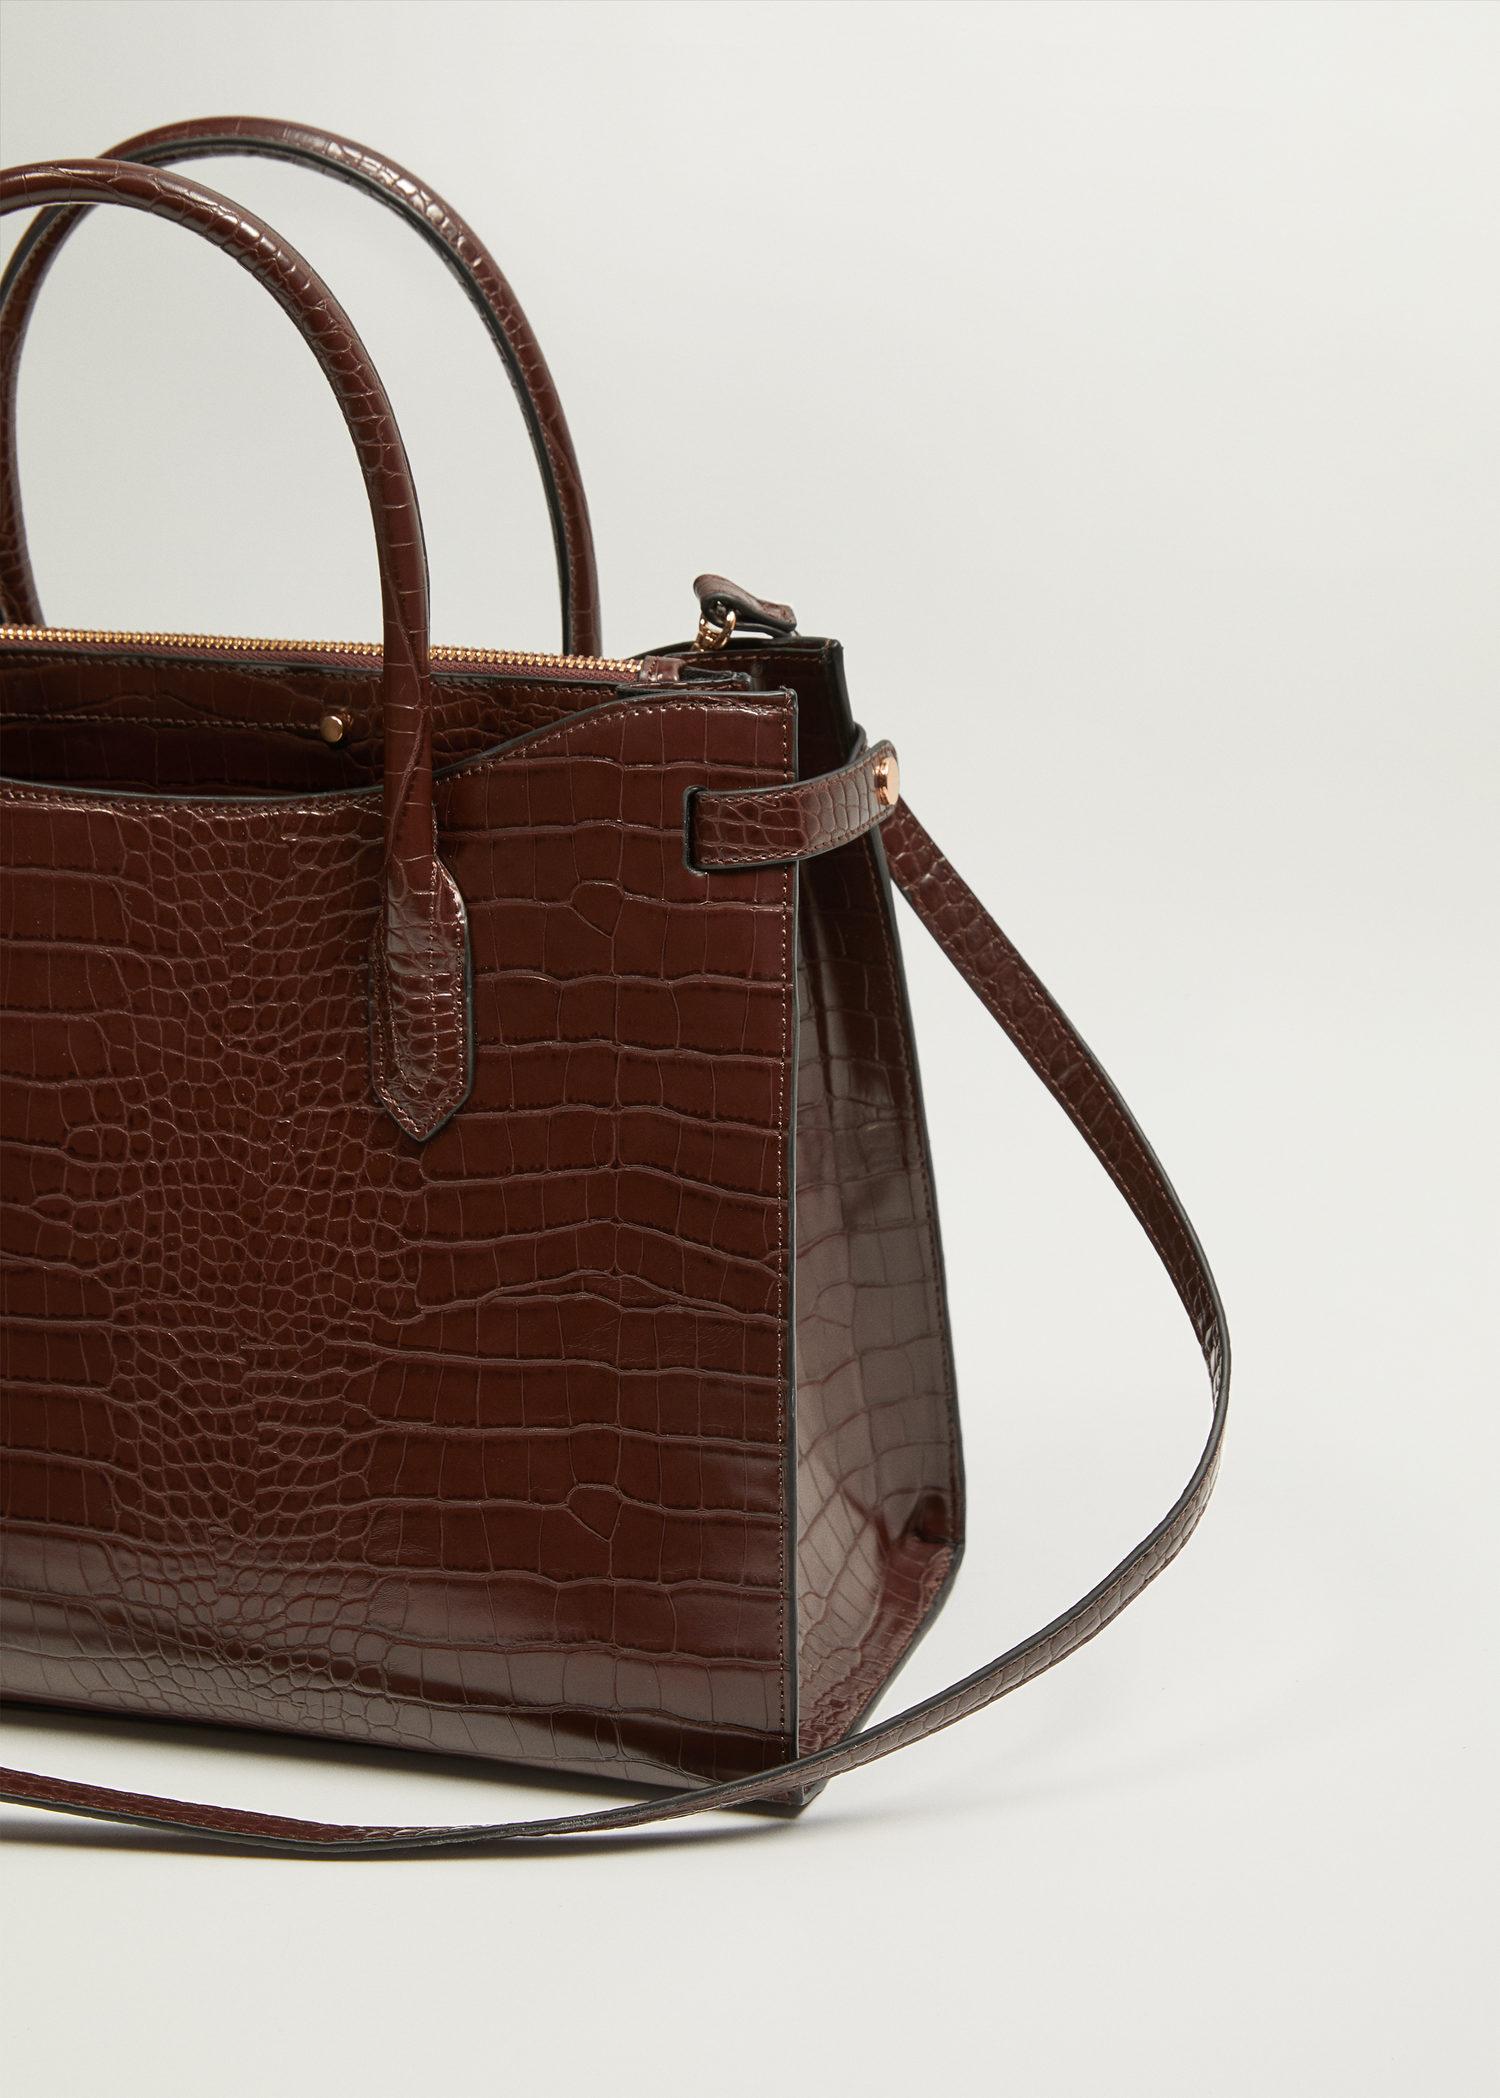 Mango Synthetic Croc-effect Bag Chocolate in Brown - Lyst